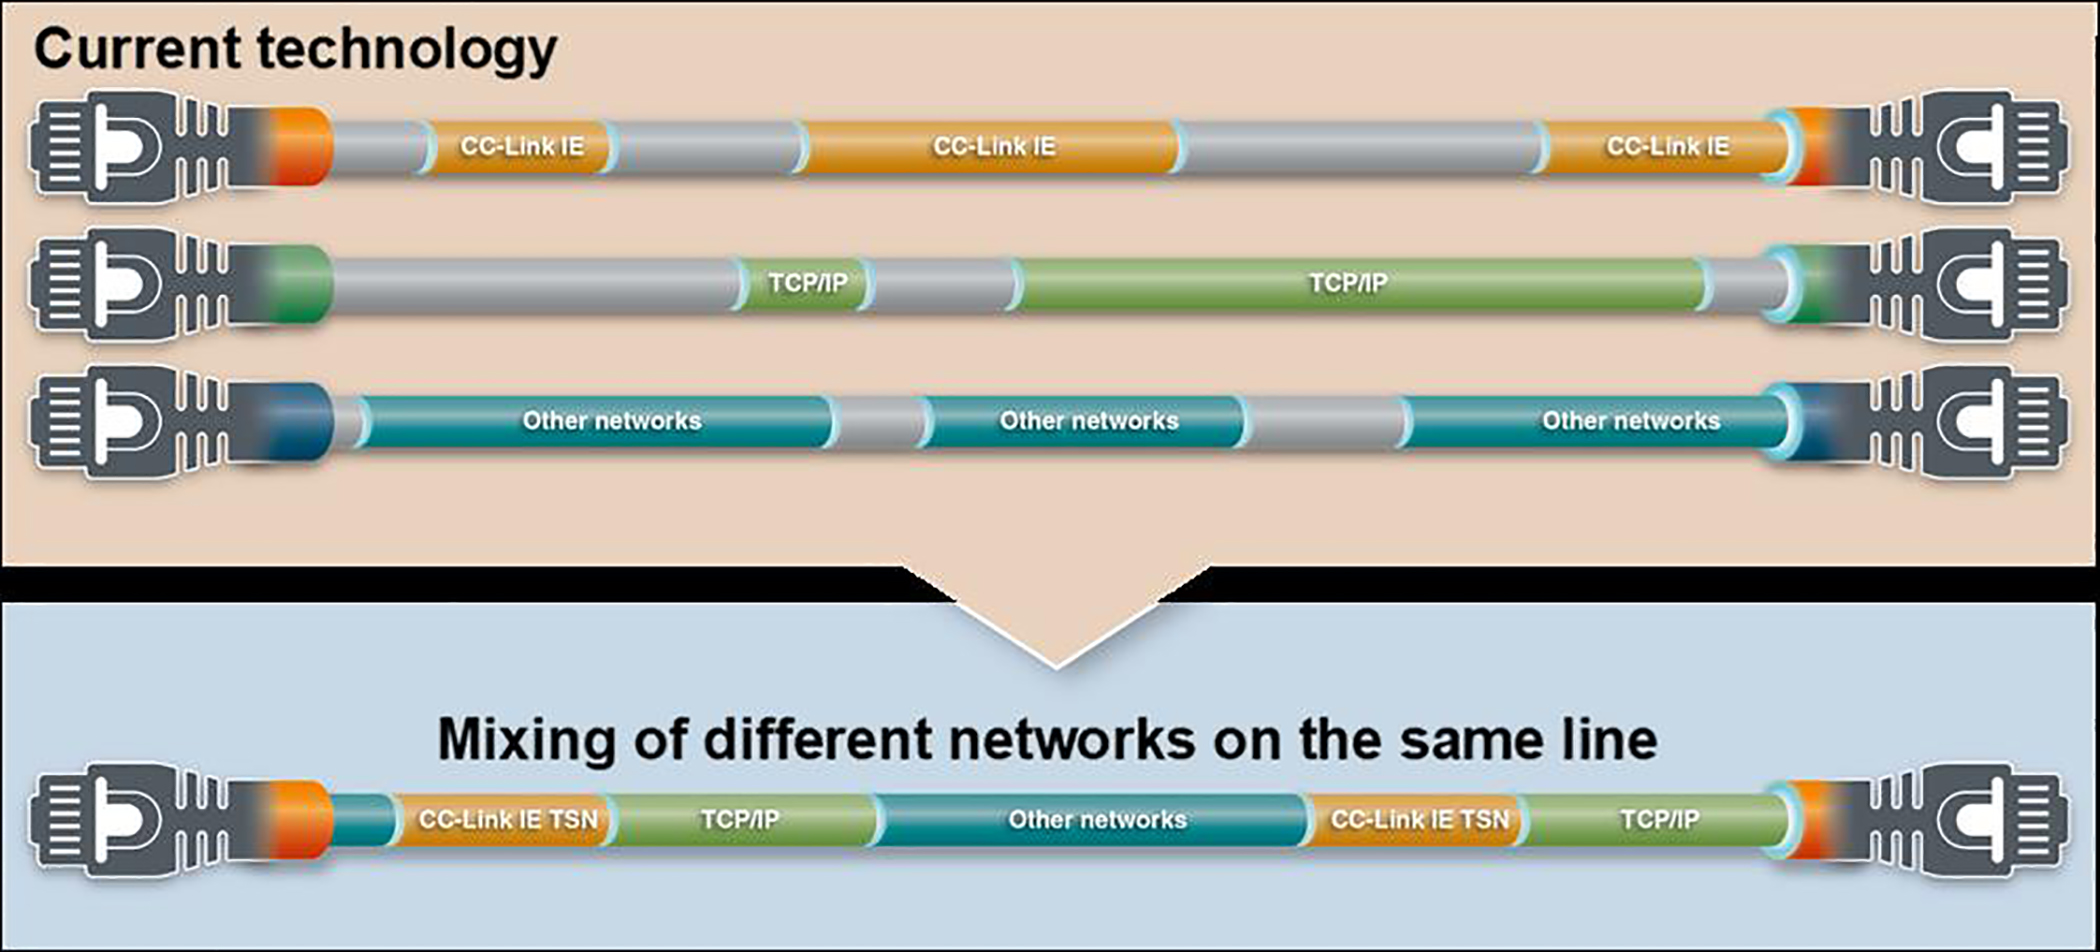 Mixing of different networks on the same line